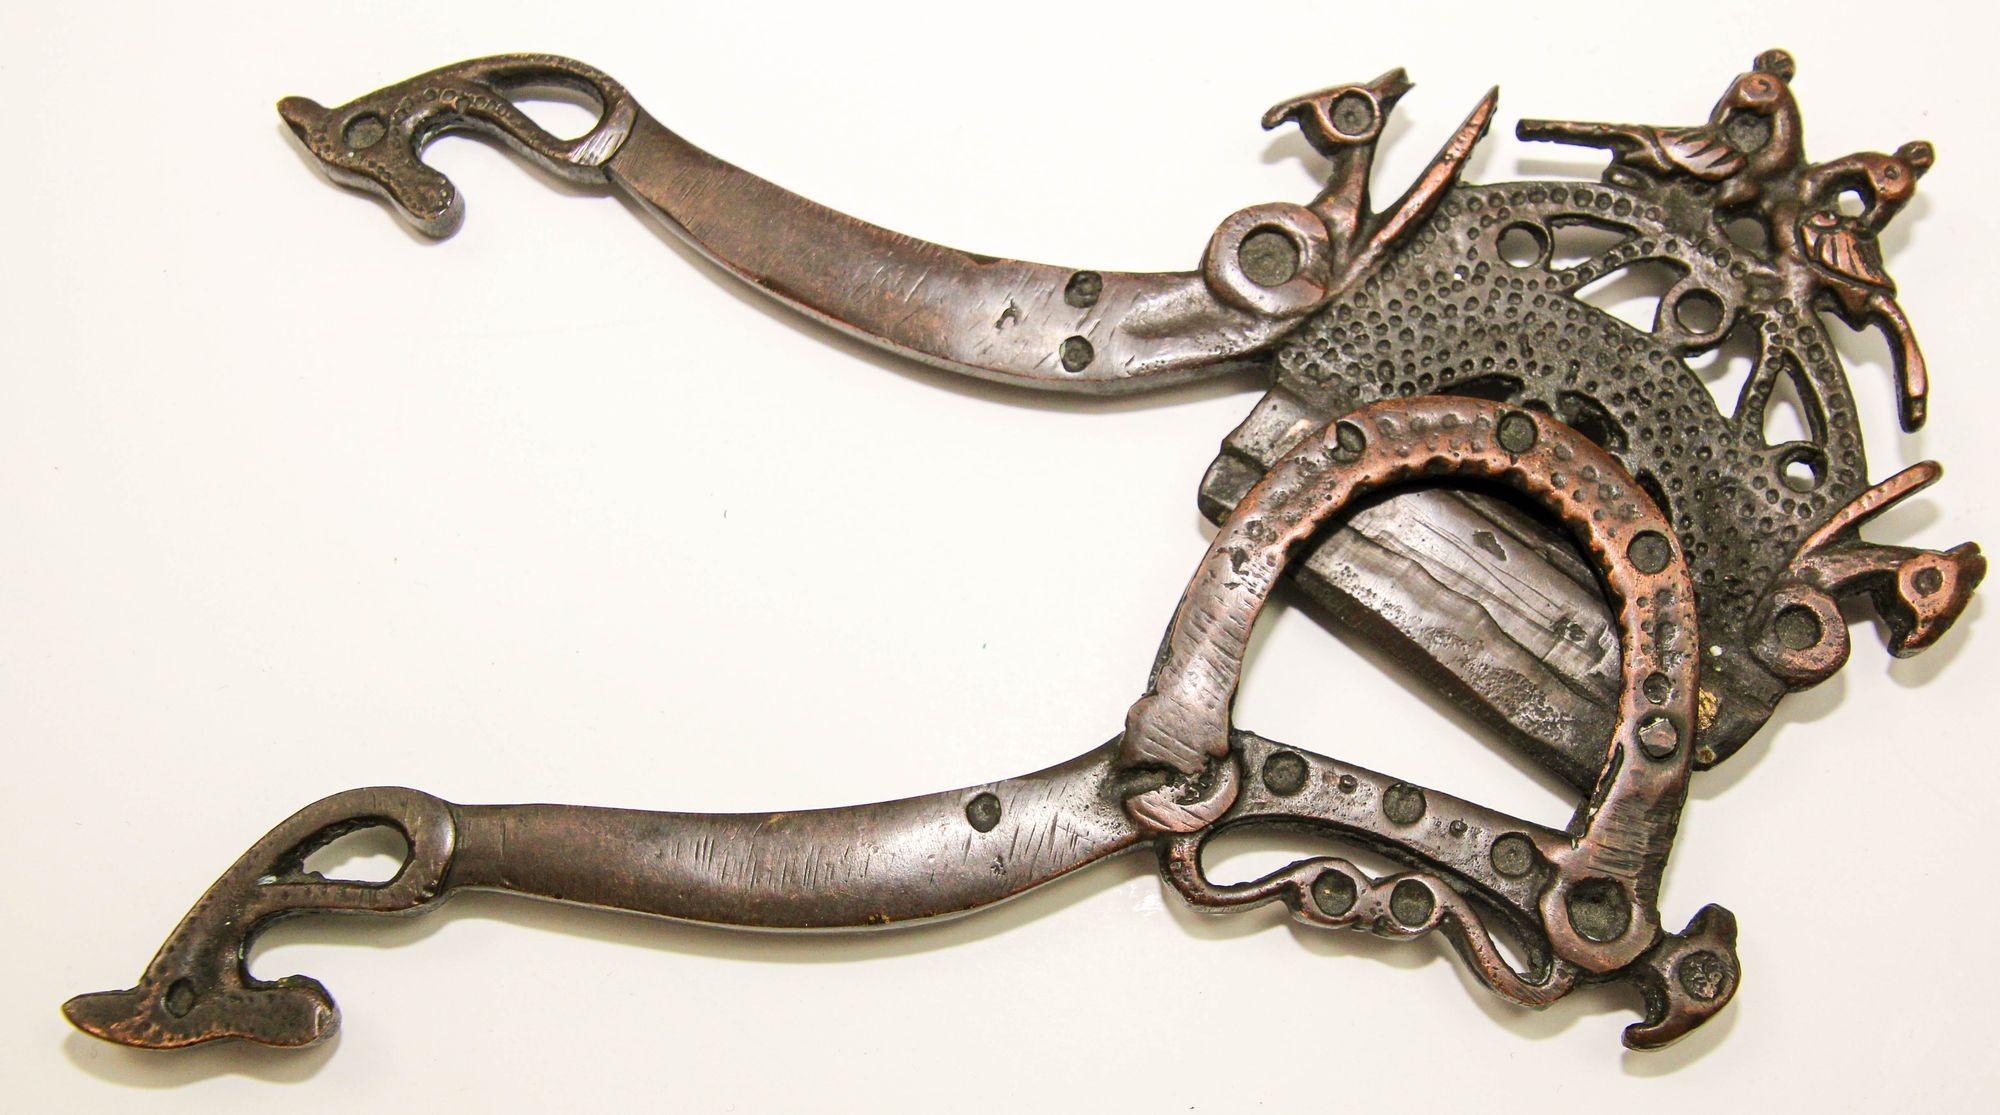 Antique Brass Betel Nut Cutter from India Collectible Asian Artifact In Good Condition For Sale In North Hollywood, CA